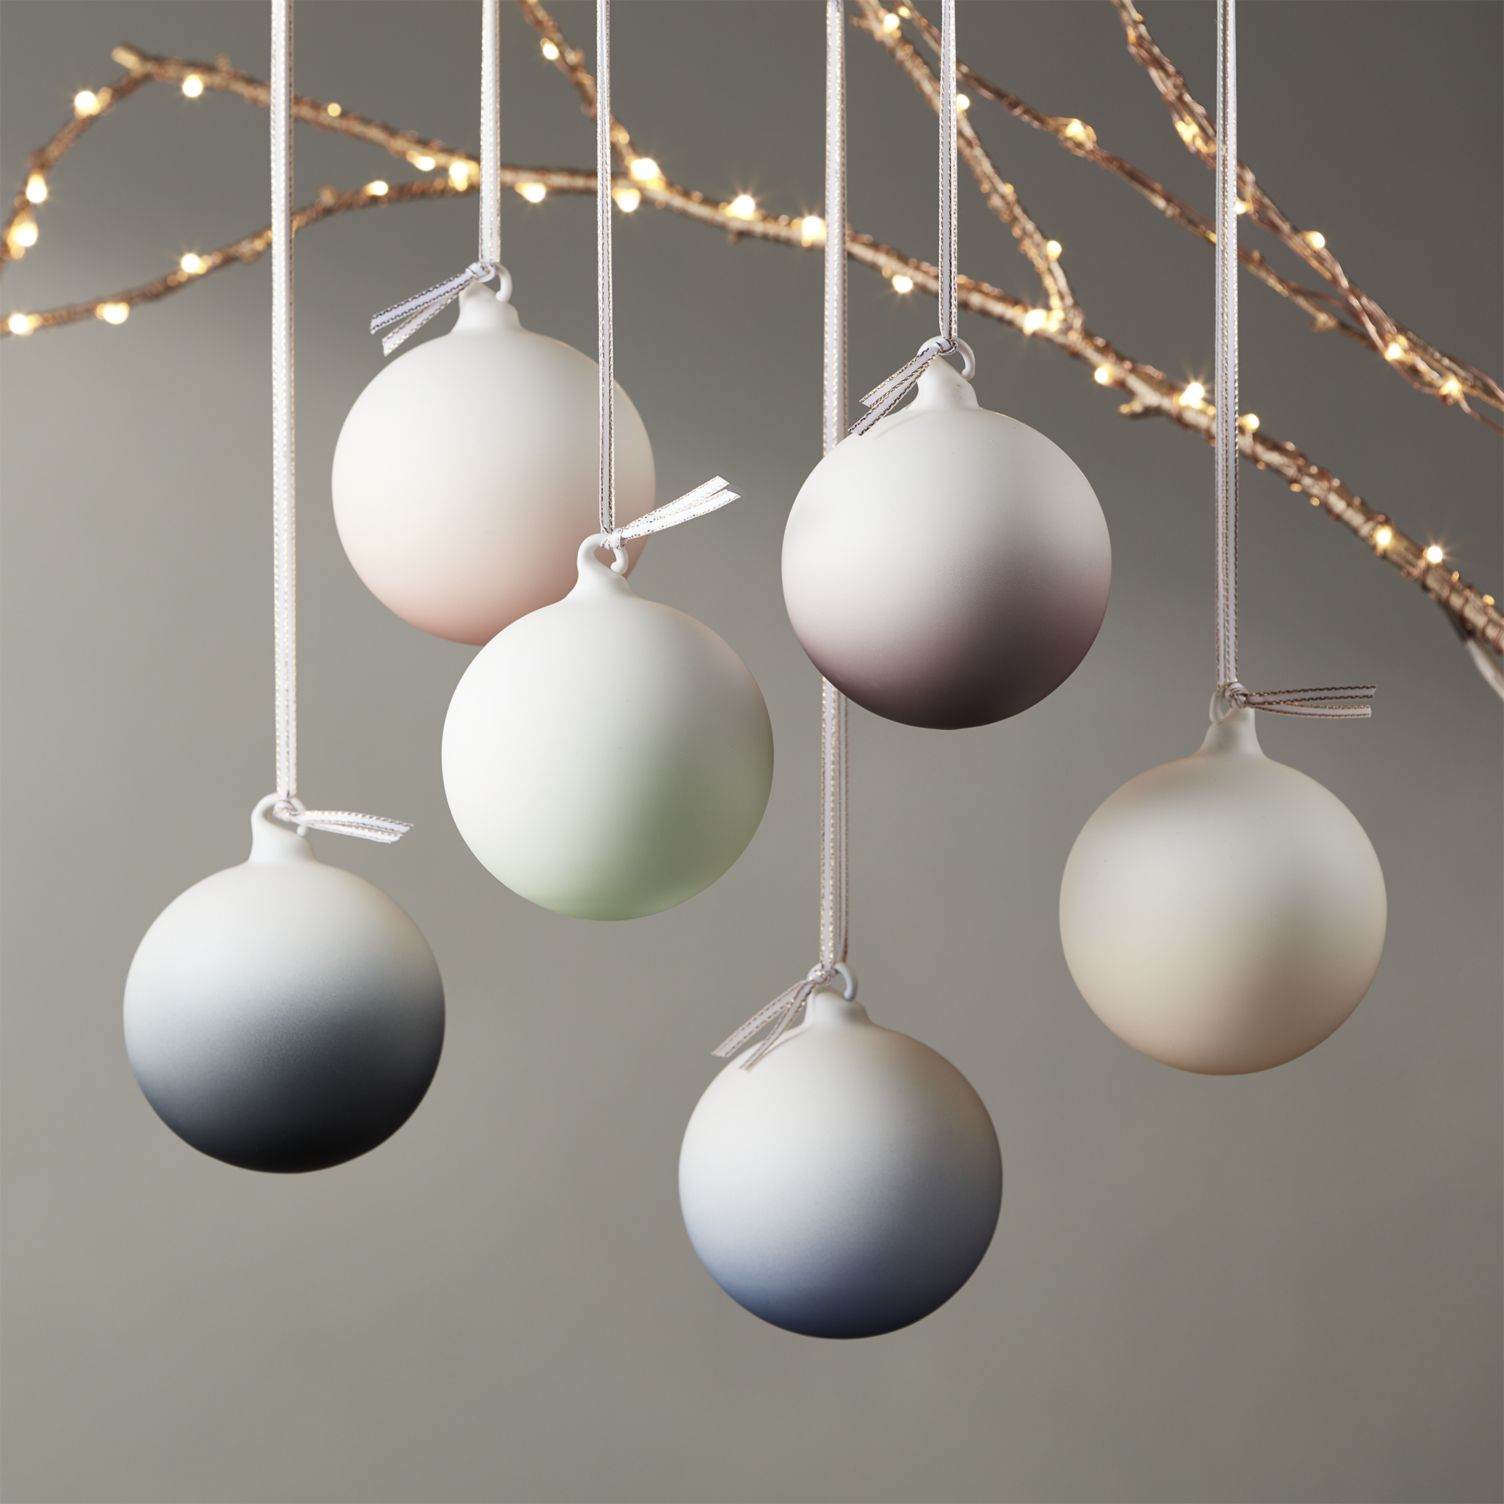 Ombre-ornaments-from-CB2